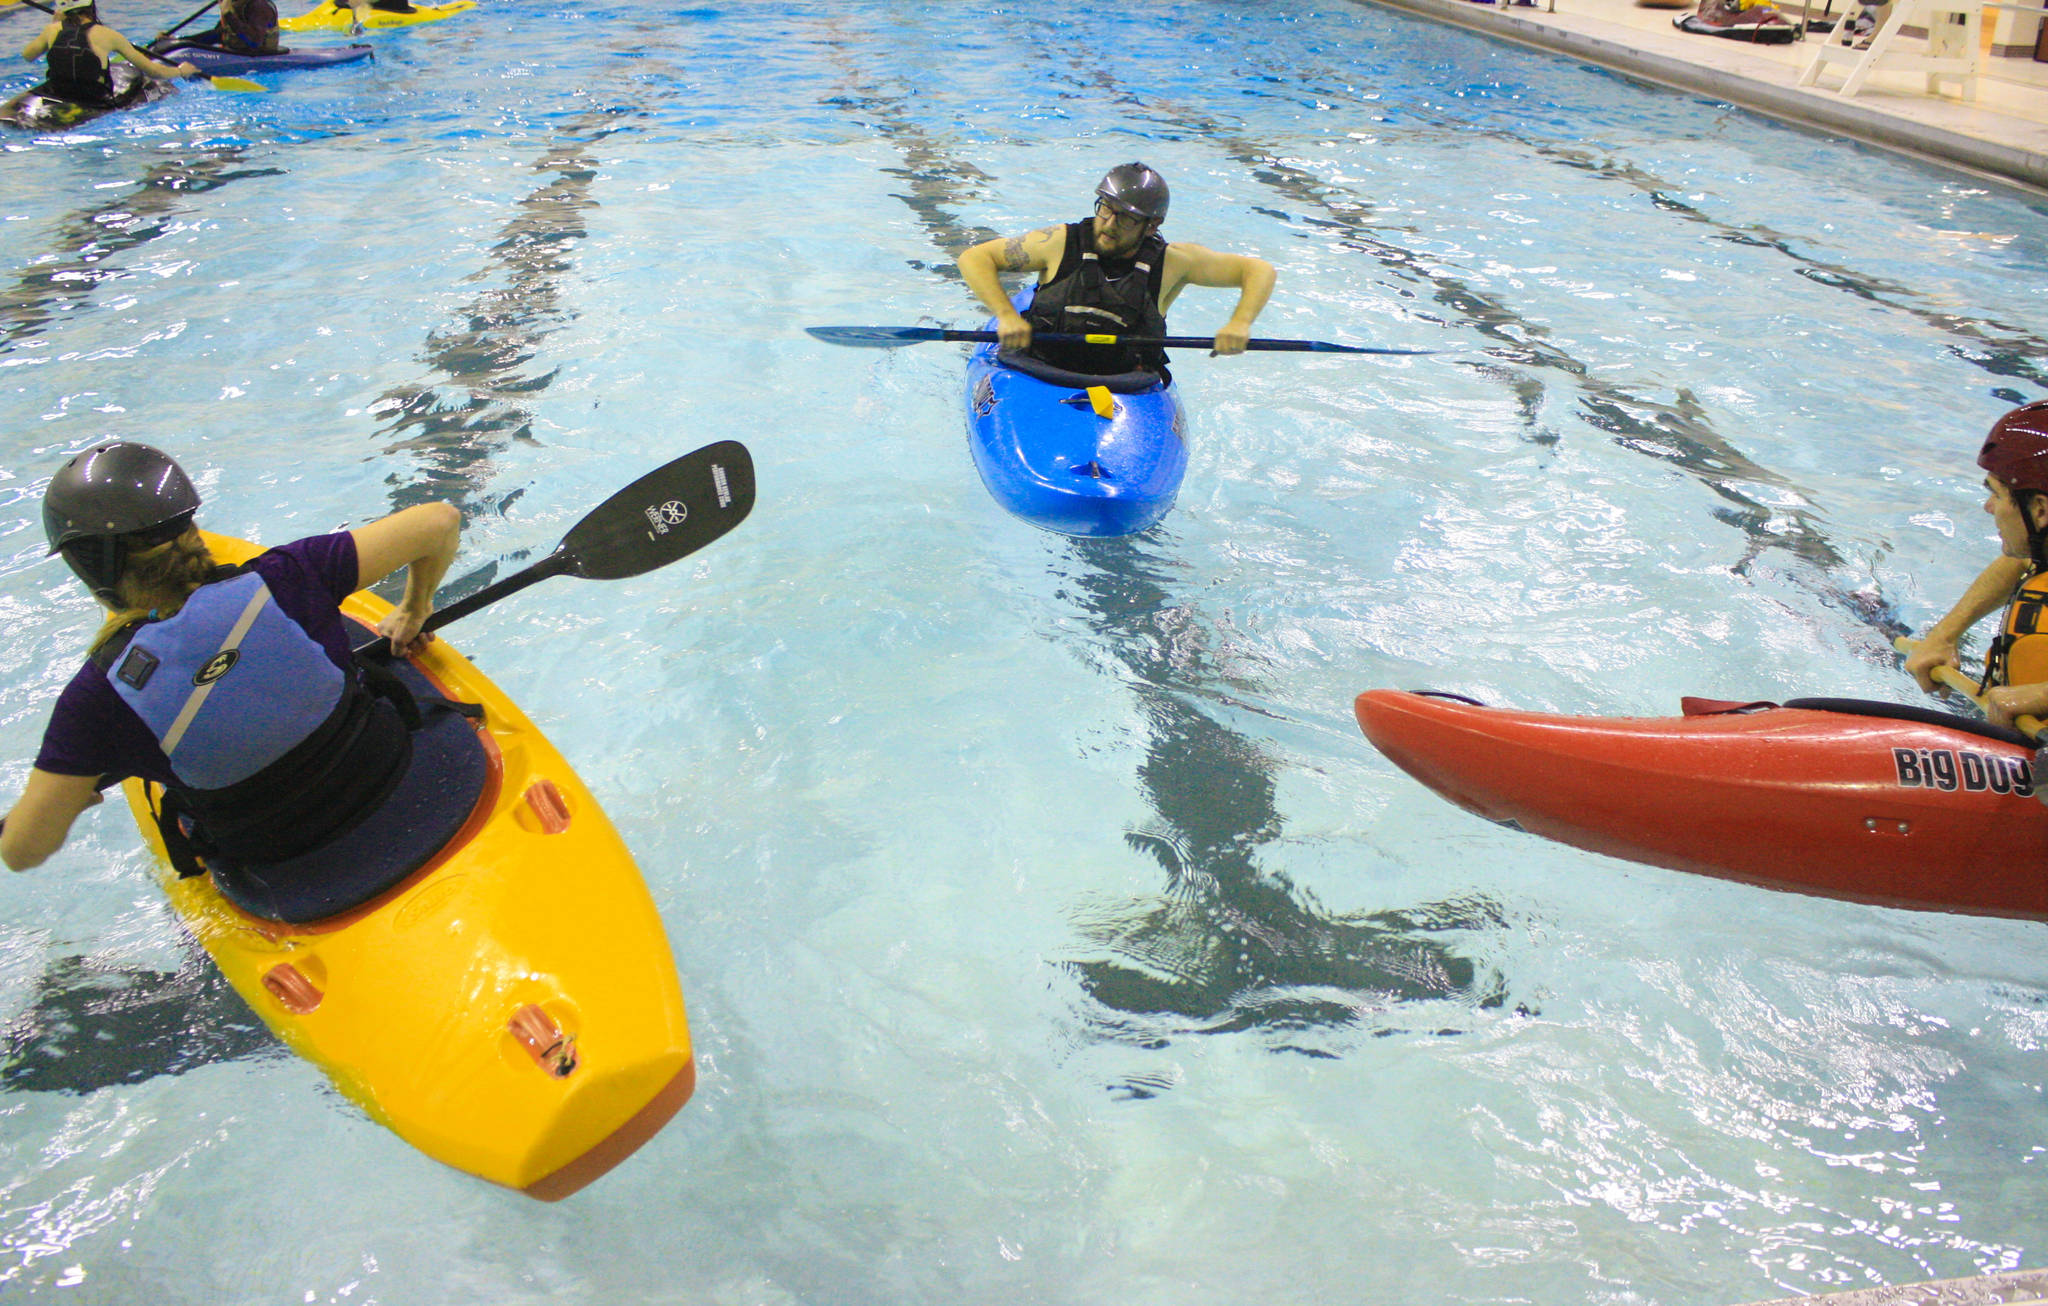 Kayakers take instruction from Matthew Pyhala, owner of the Immersion Paddling Academy, during a Dec. 13 training session at the Skyview pool. (Photo by Erin Thompson/Peninsula Clarion)